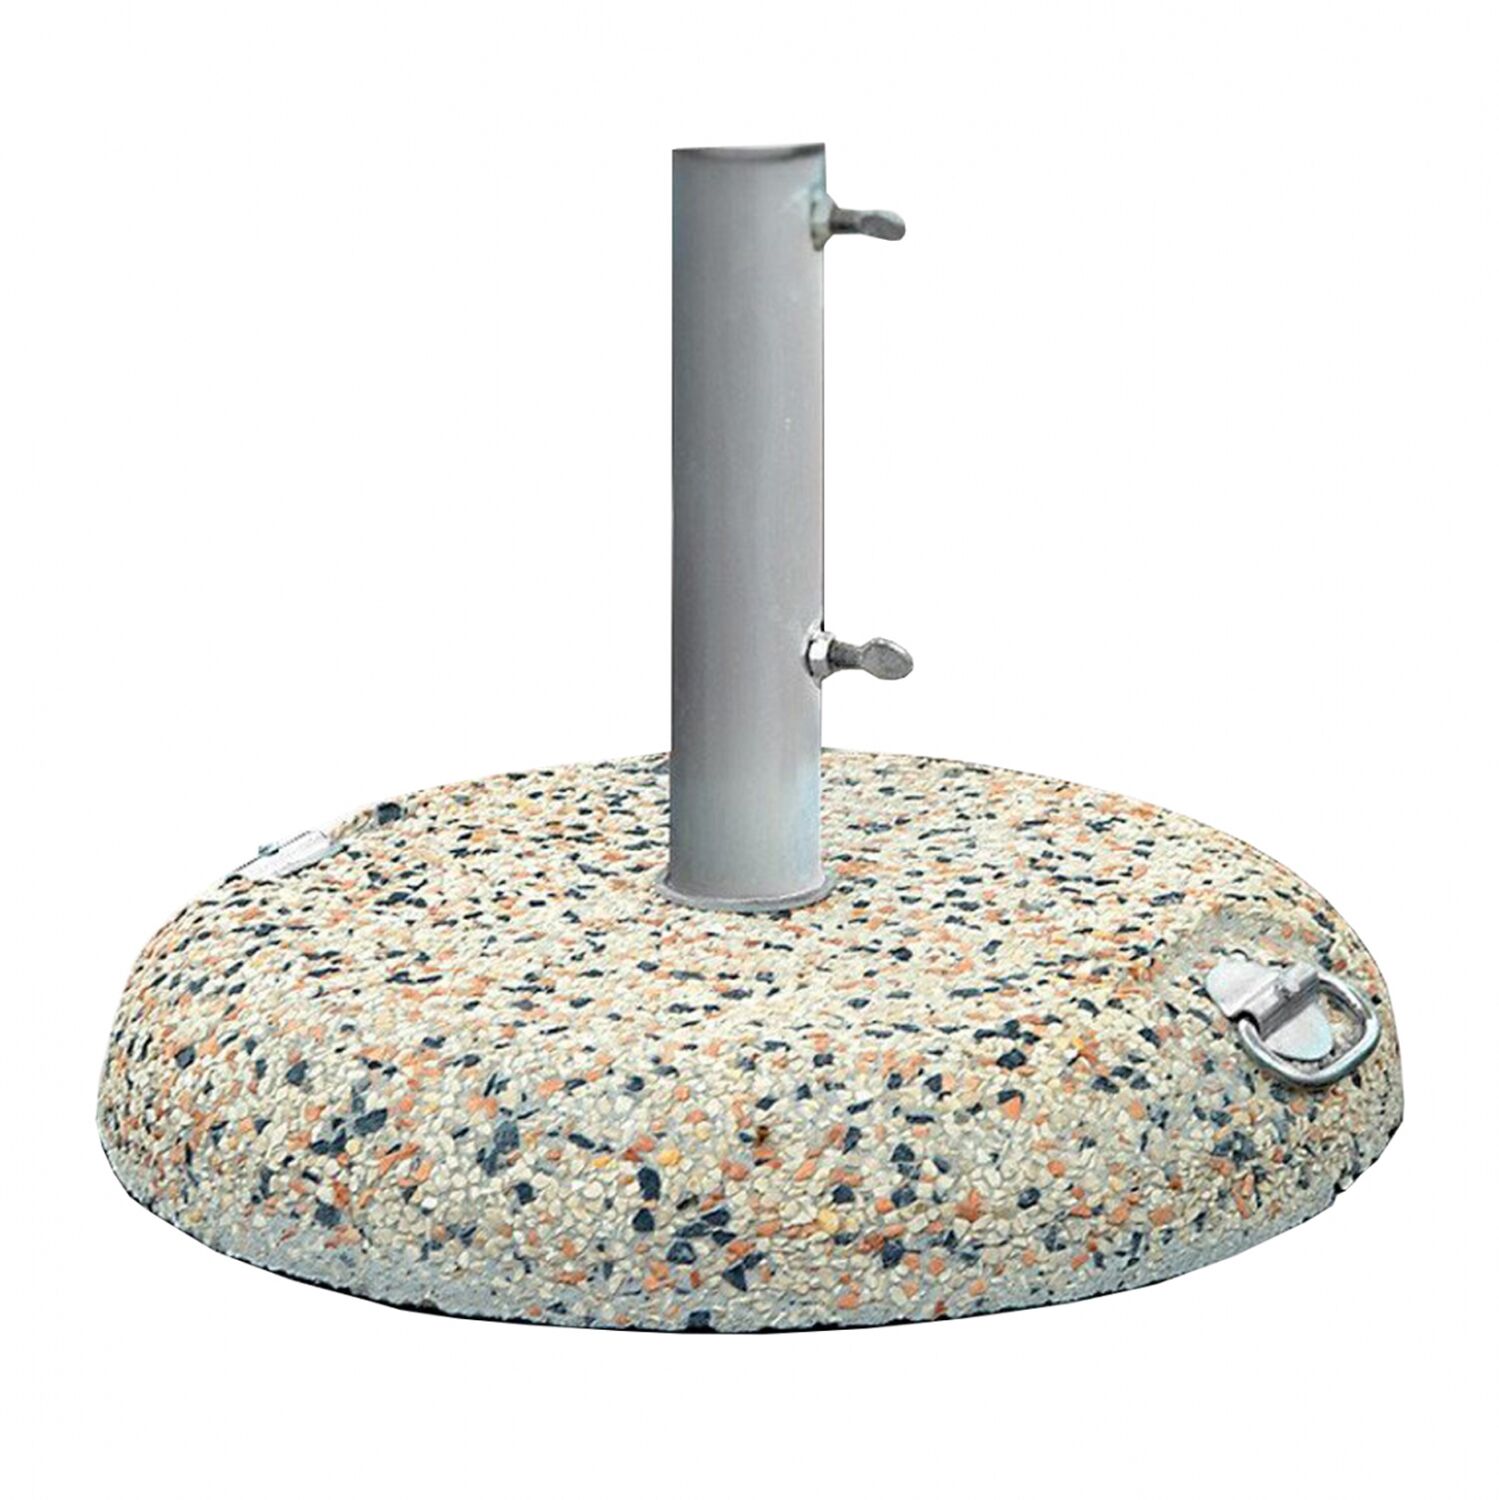 Umbrella's Base with Mosaic 70Kg HM5476.70 with tube diameter 62mm